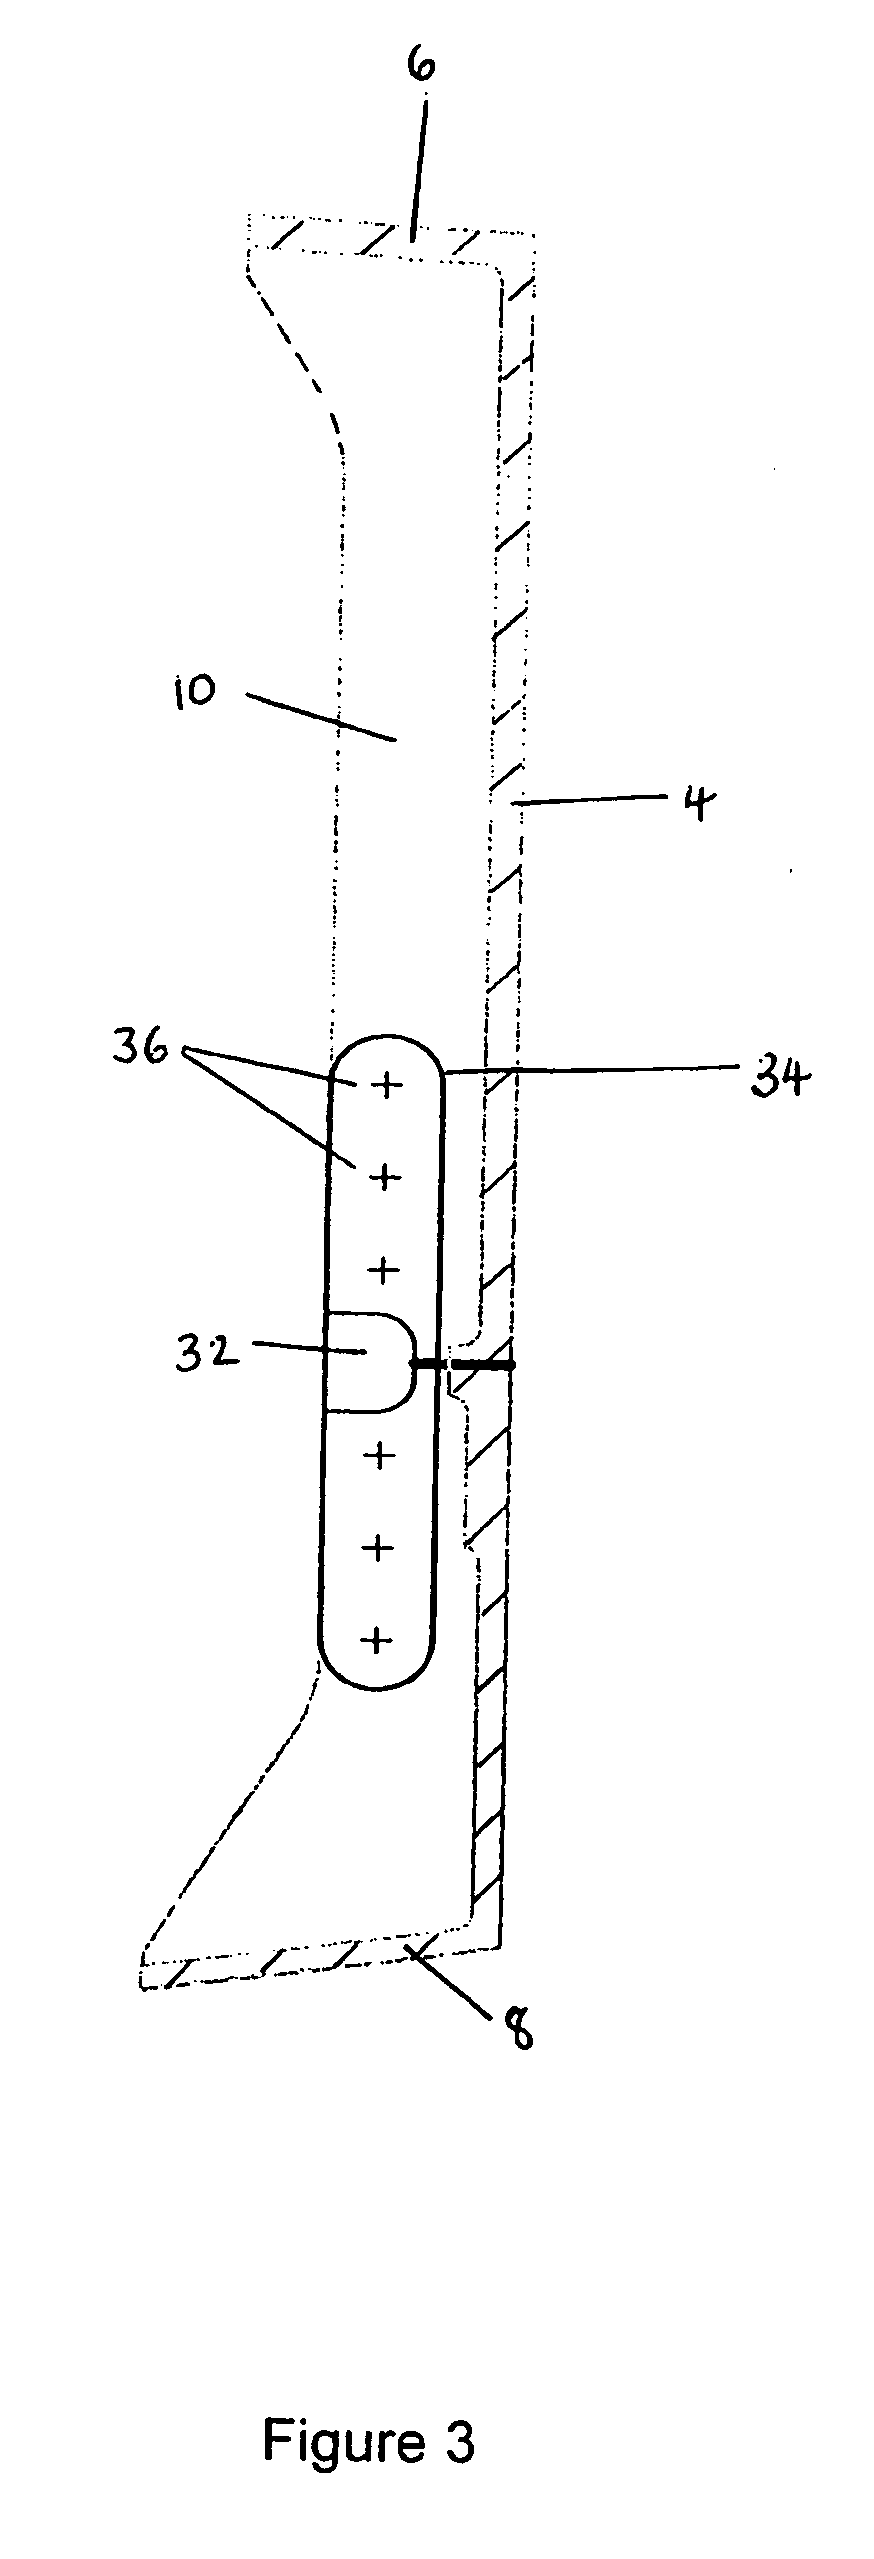 Welding process for large structures